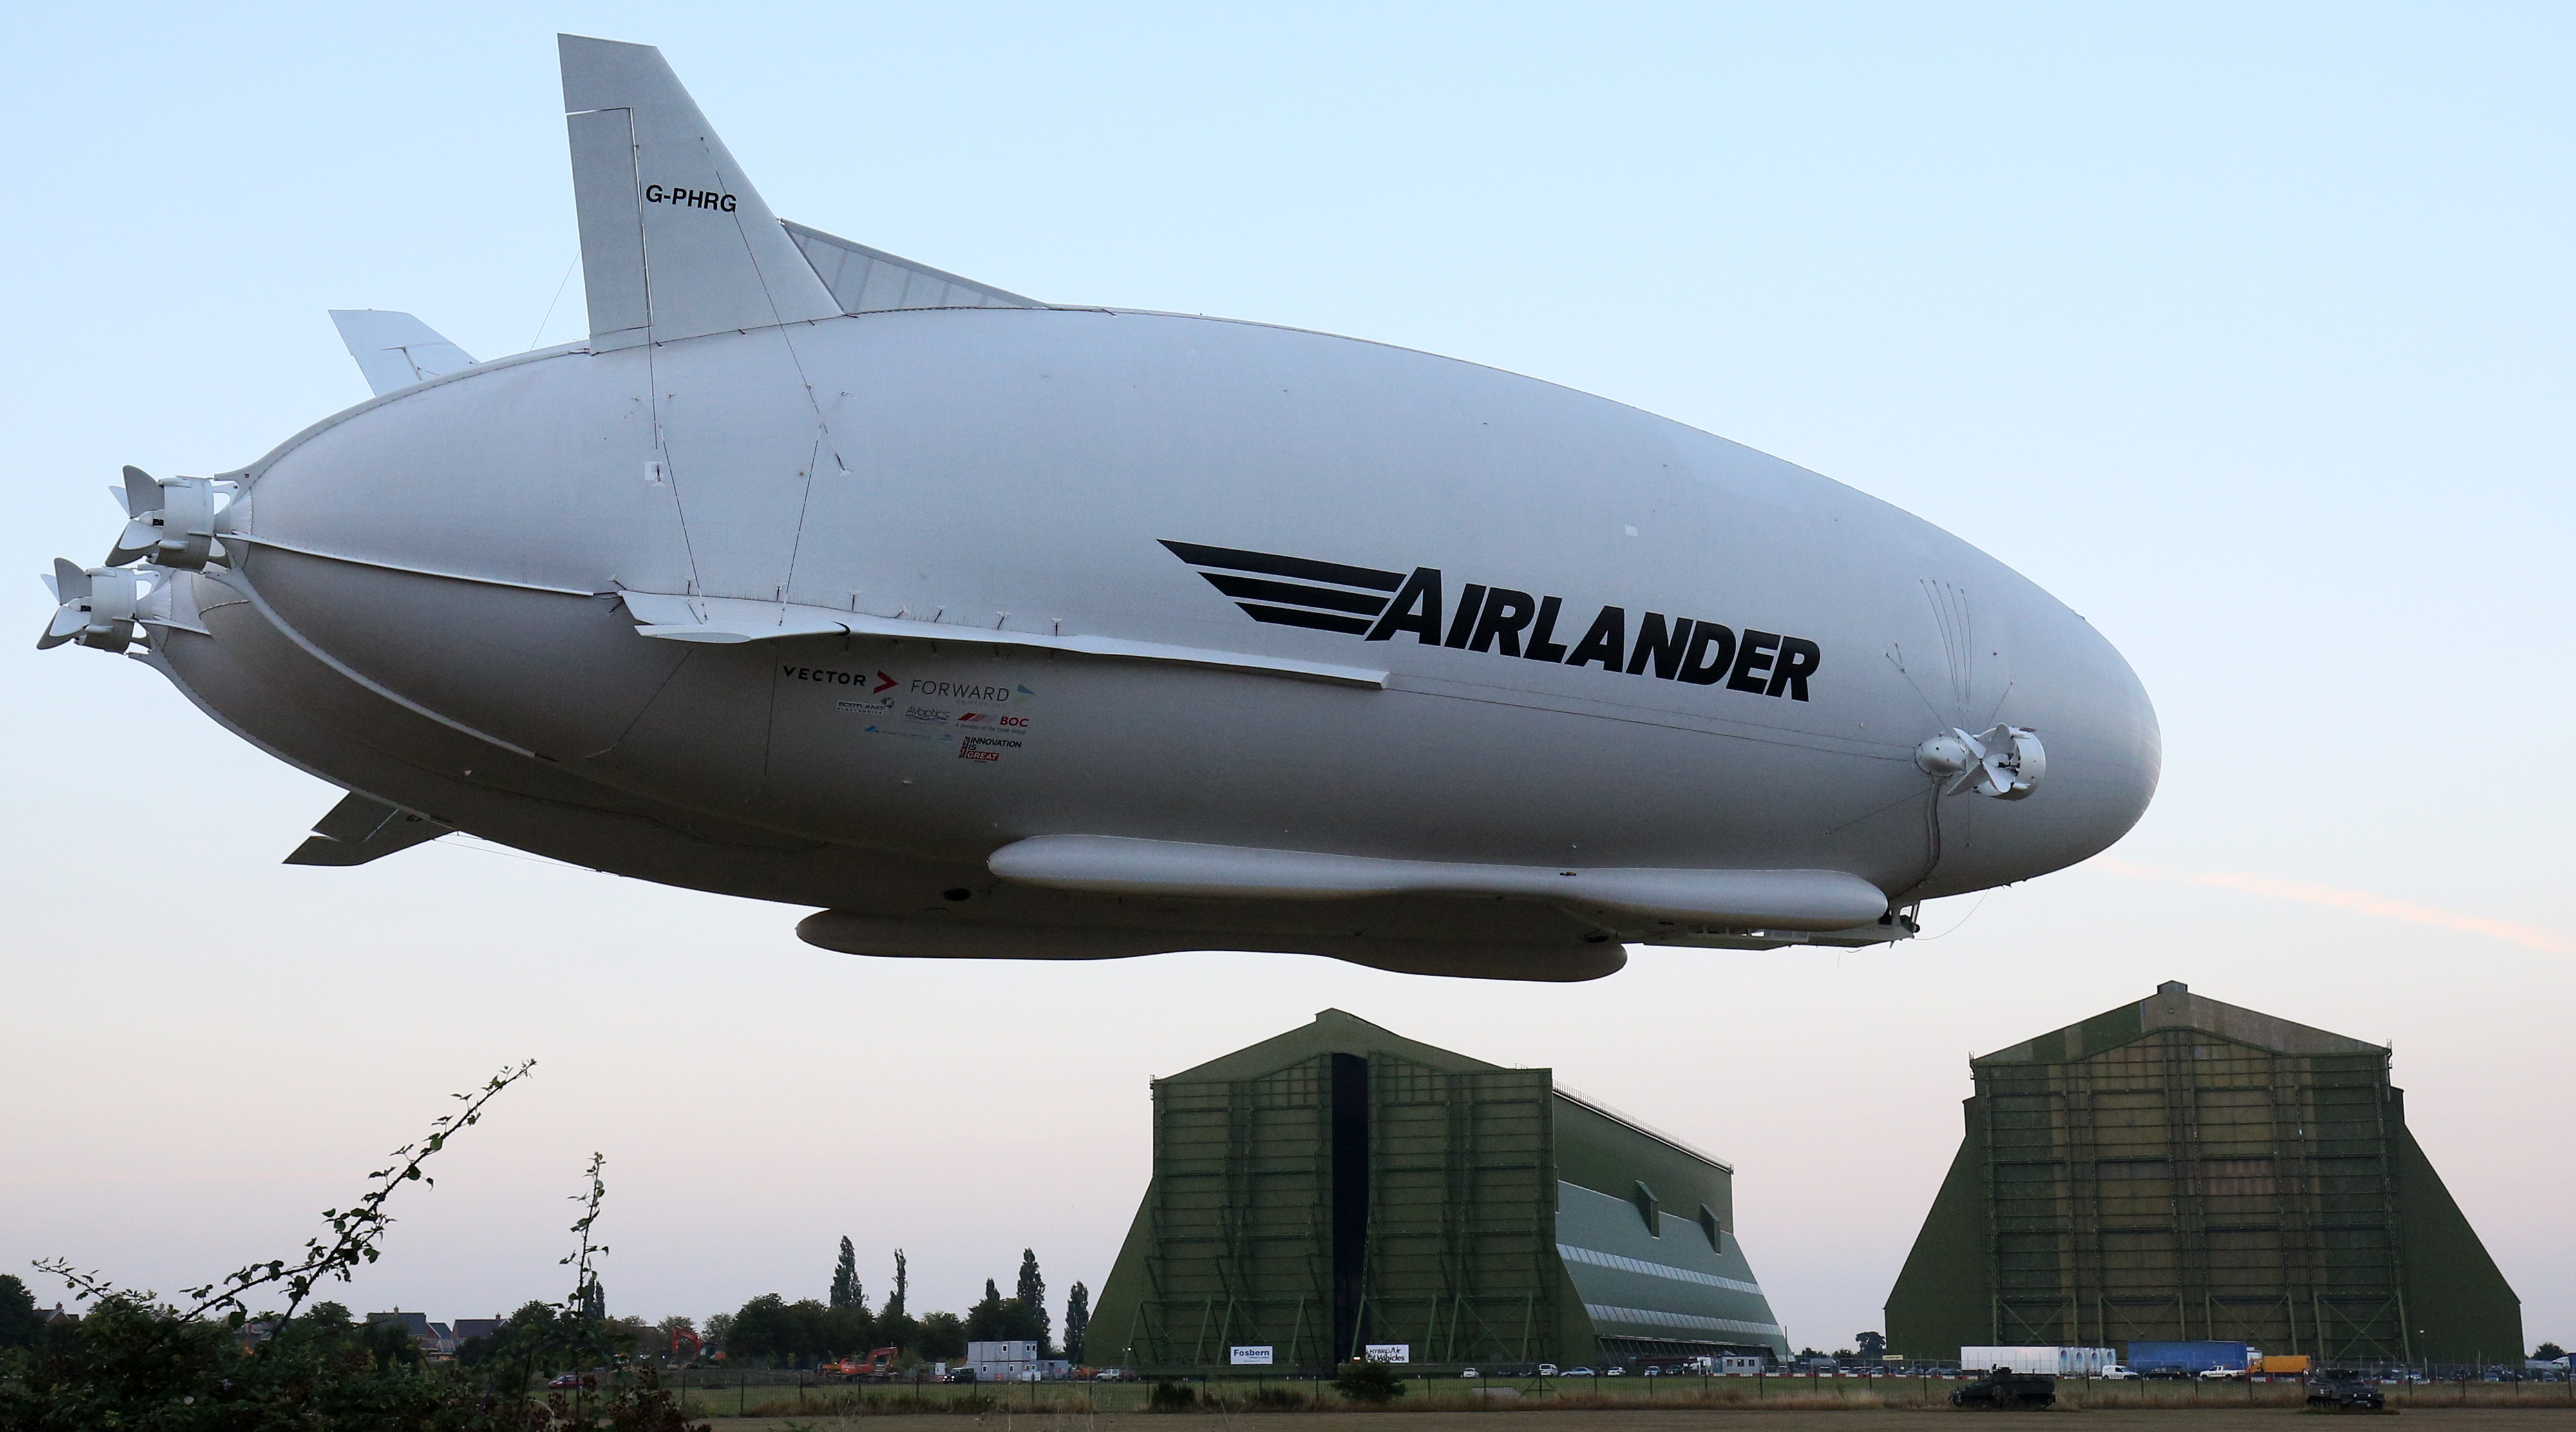 The Hybrid Air Vehicles HAV 304 Airlander 10 hybrid airship is seen with hangars in the background on its maiden flight at Cardington Airfield near Bedford, north of London, on August 17, 2016.  The Hybrid Air Vehicles 92-metre long, 43.5-metre wide Airlander 10, billed as the world's longest aircraft, lifted off for the first time from an airfield north of London. The Airlander 10 has a large helium-filled fabric hull and is propelled by four turbocharged diesel engines. According to the company it can stay airborne for up to five days at a time if manned, and for over 2 weeks unmanned with a cruising speed of just under 150 km per hour and a payload capacity of up to 10,000 kg. / AFP PHOTO / JUSTIN TALLIS